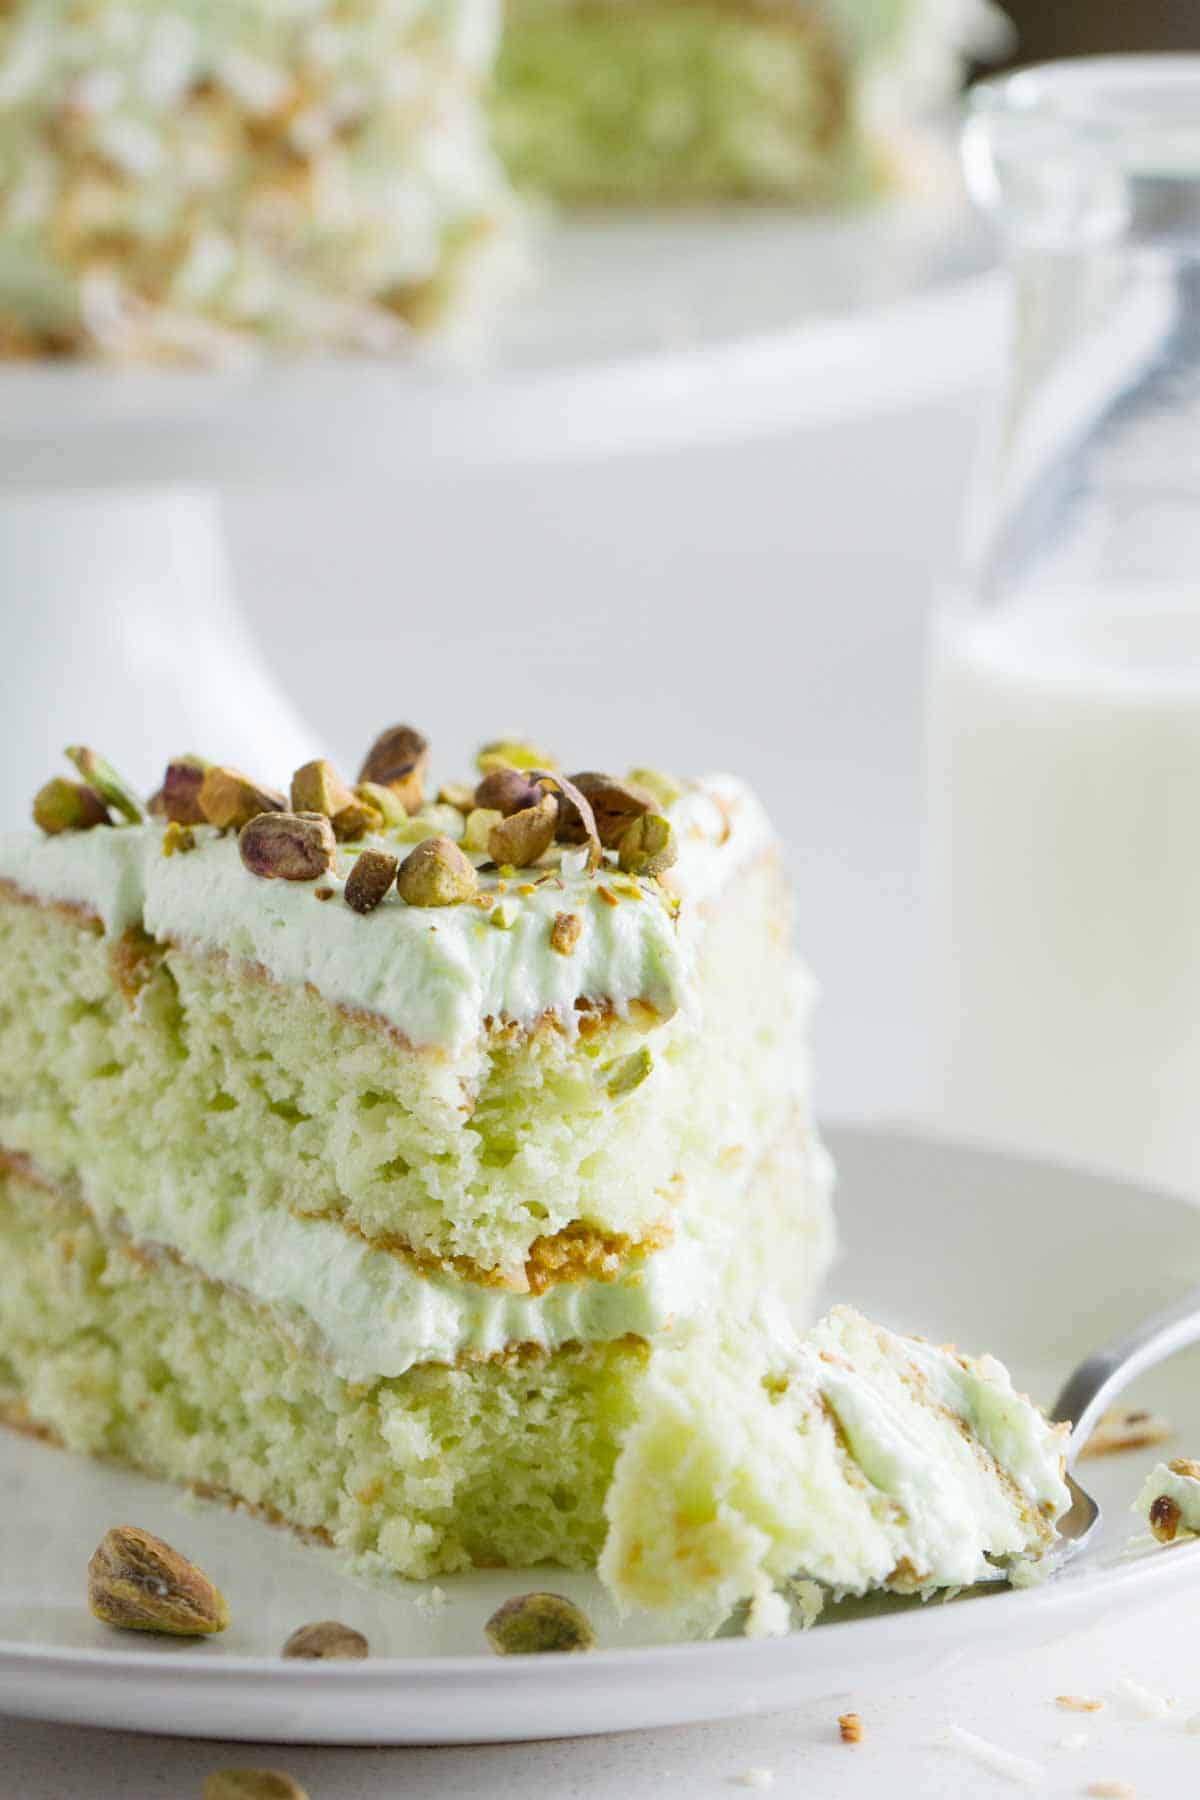 Pistachio Cake - aka Watergate Cake - with a bite taken from it.